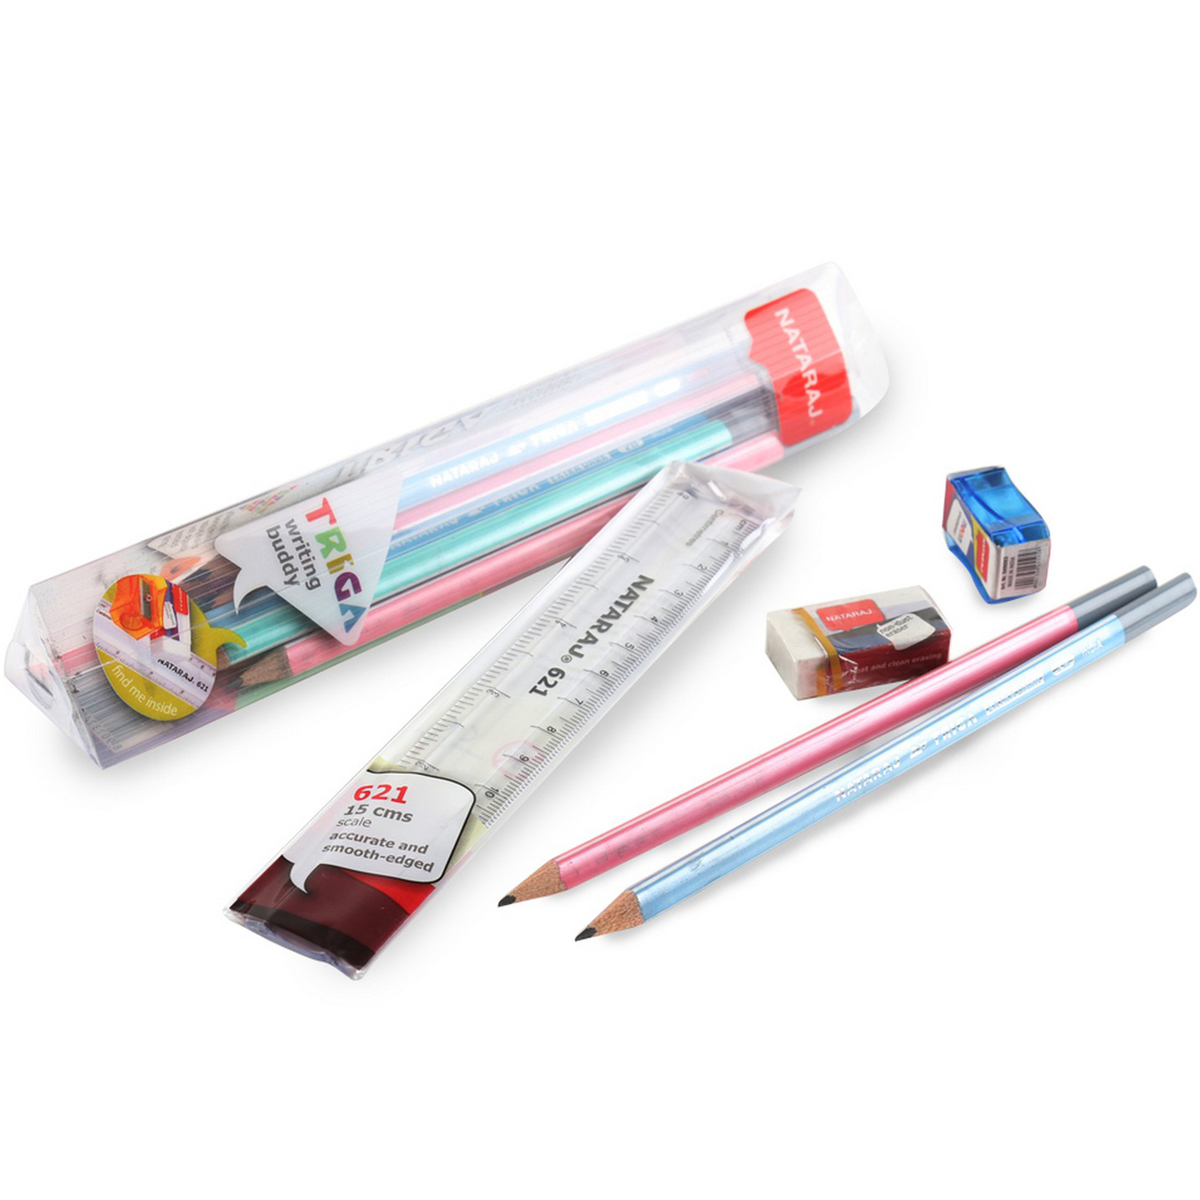 Just Stationery HB Pencil with Eraser Top Pack of 15